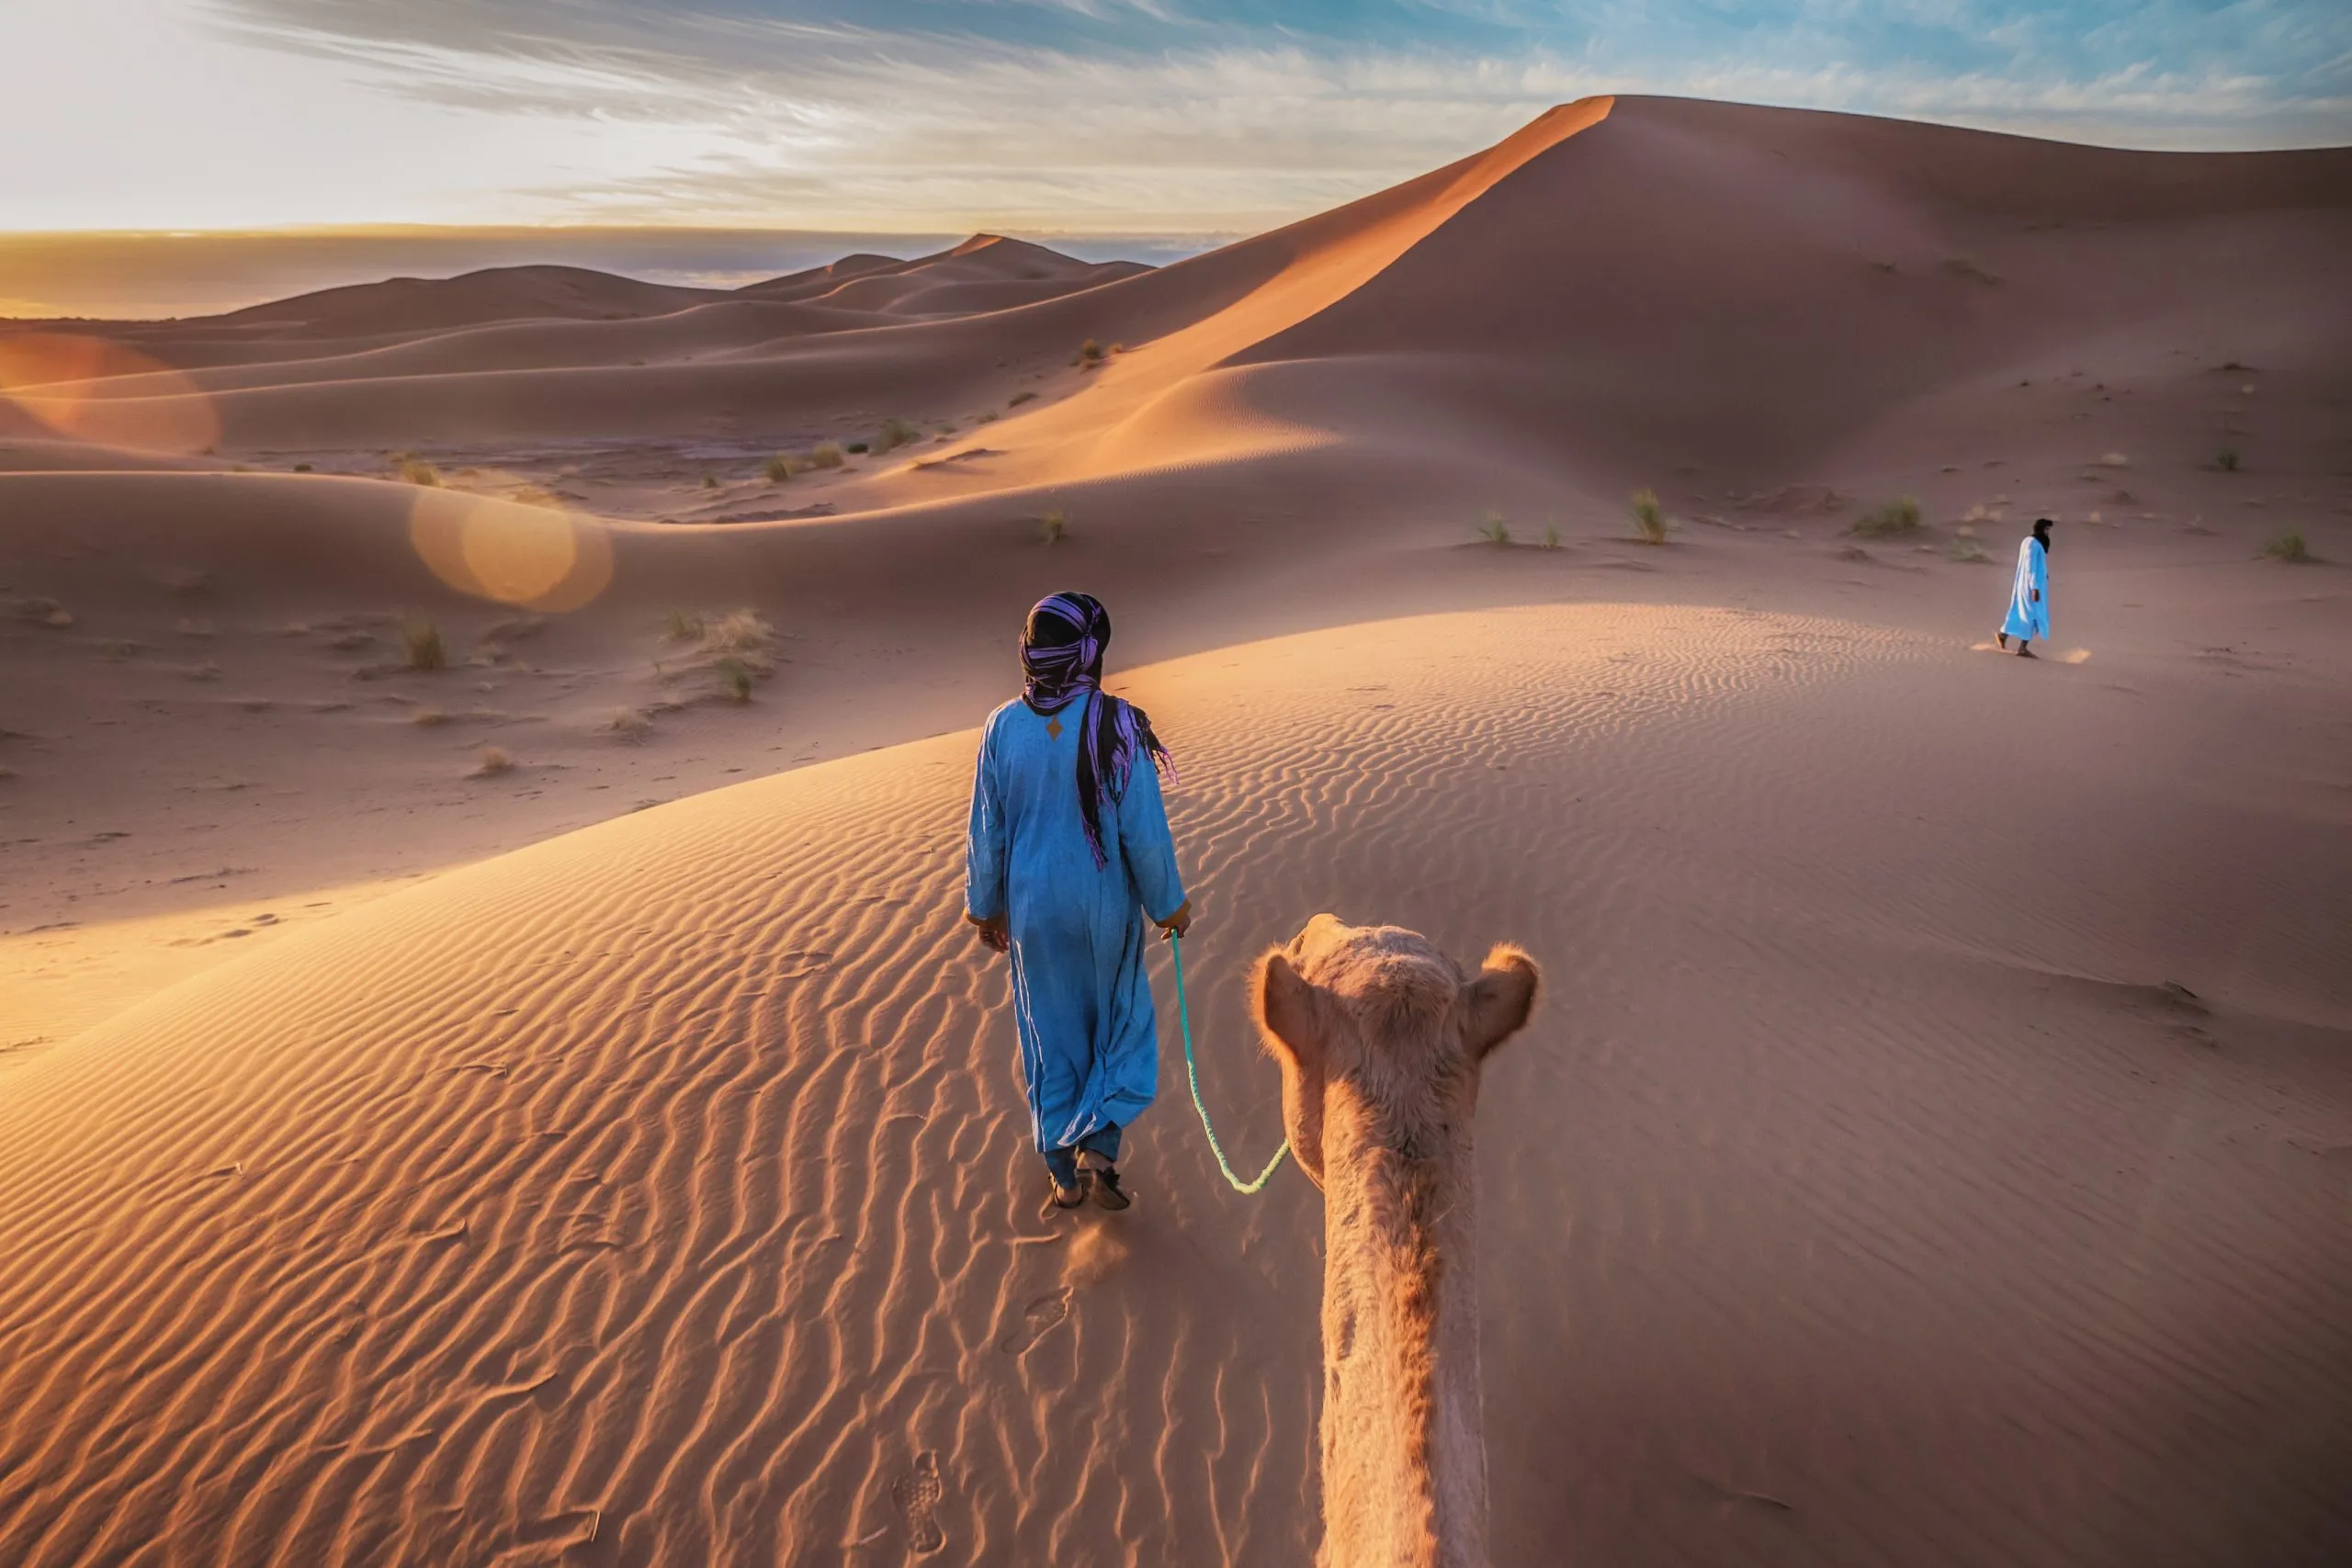 Two Tuareg nomads dressed in traditional long blue robes, lead a camel through the dunes of the Sahara Desert at sunrise in Morocco.